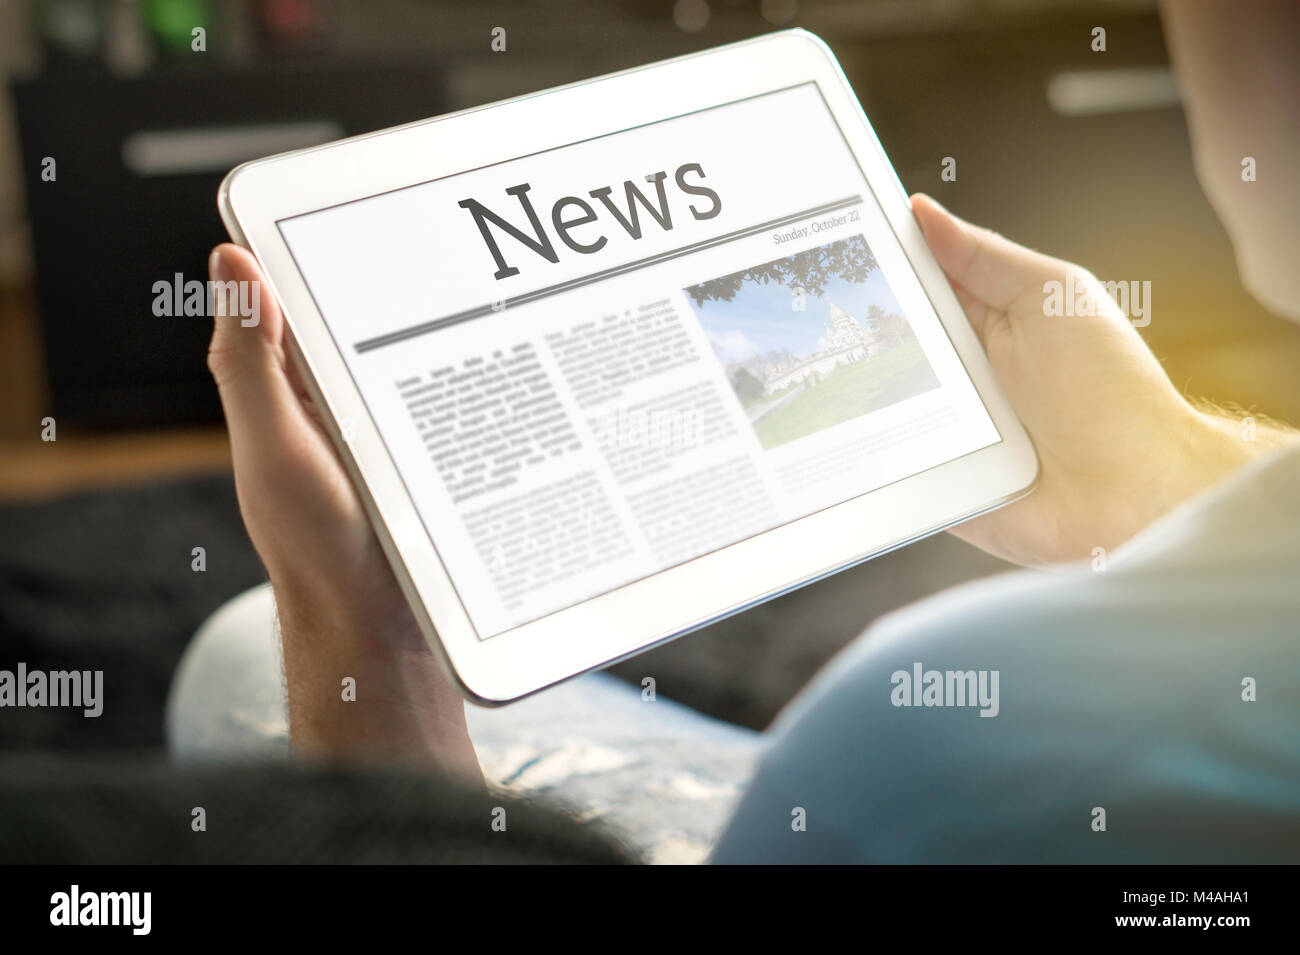 Man reading the news on tablet at home. Imaginary online and mobile news website, application or portal on modern touch screen display. Stock Photo